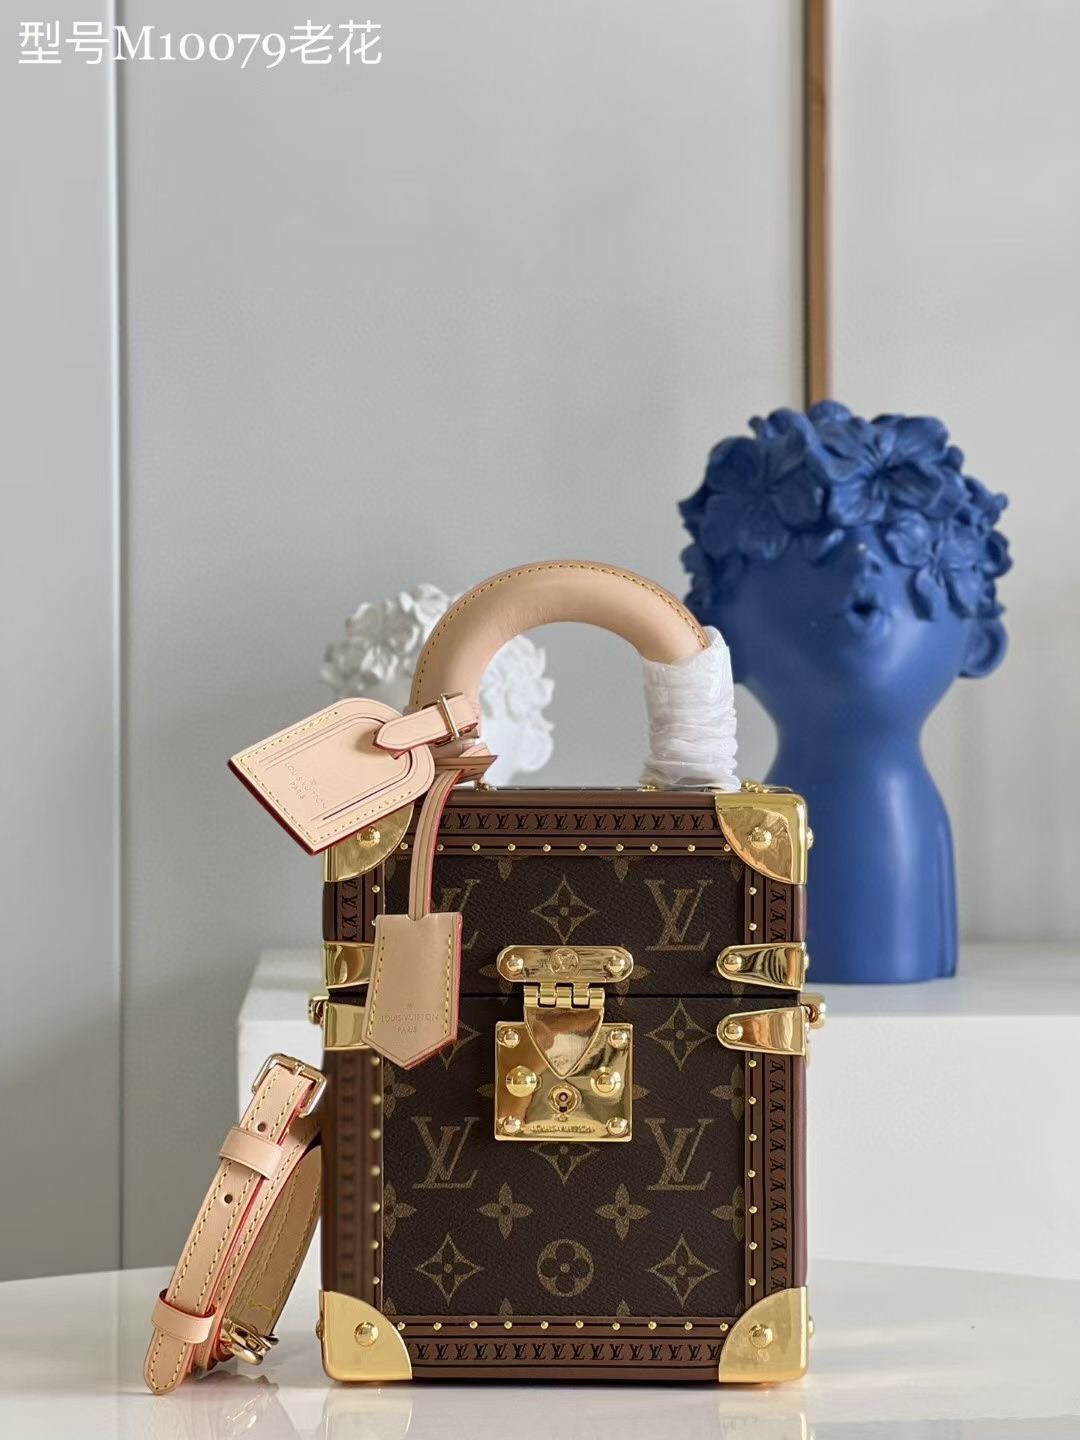 Louis Vuitton The Camera Box M10079 - Replica Bags and Shoes online Store -  AlimorLuxury